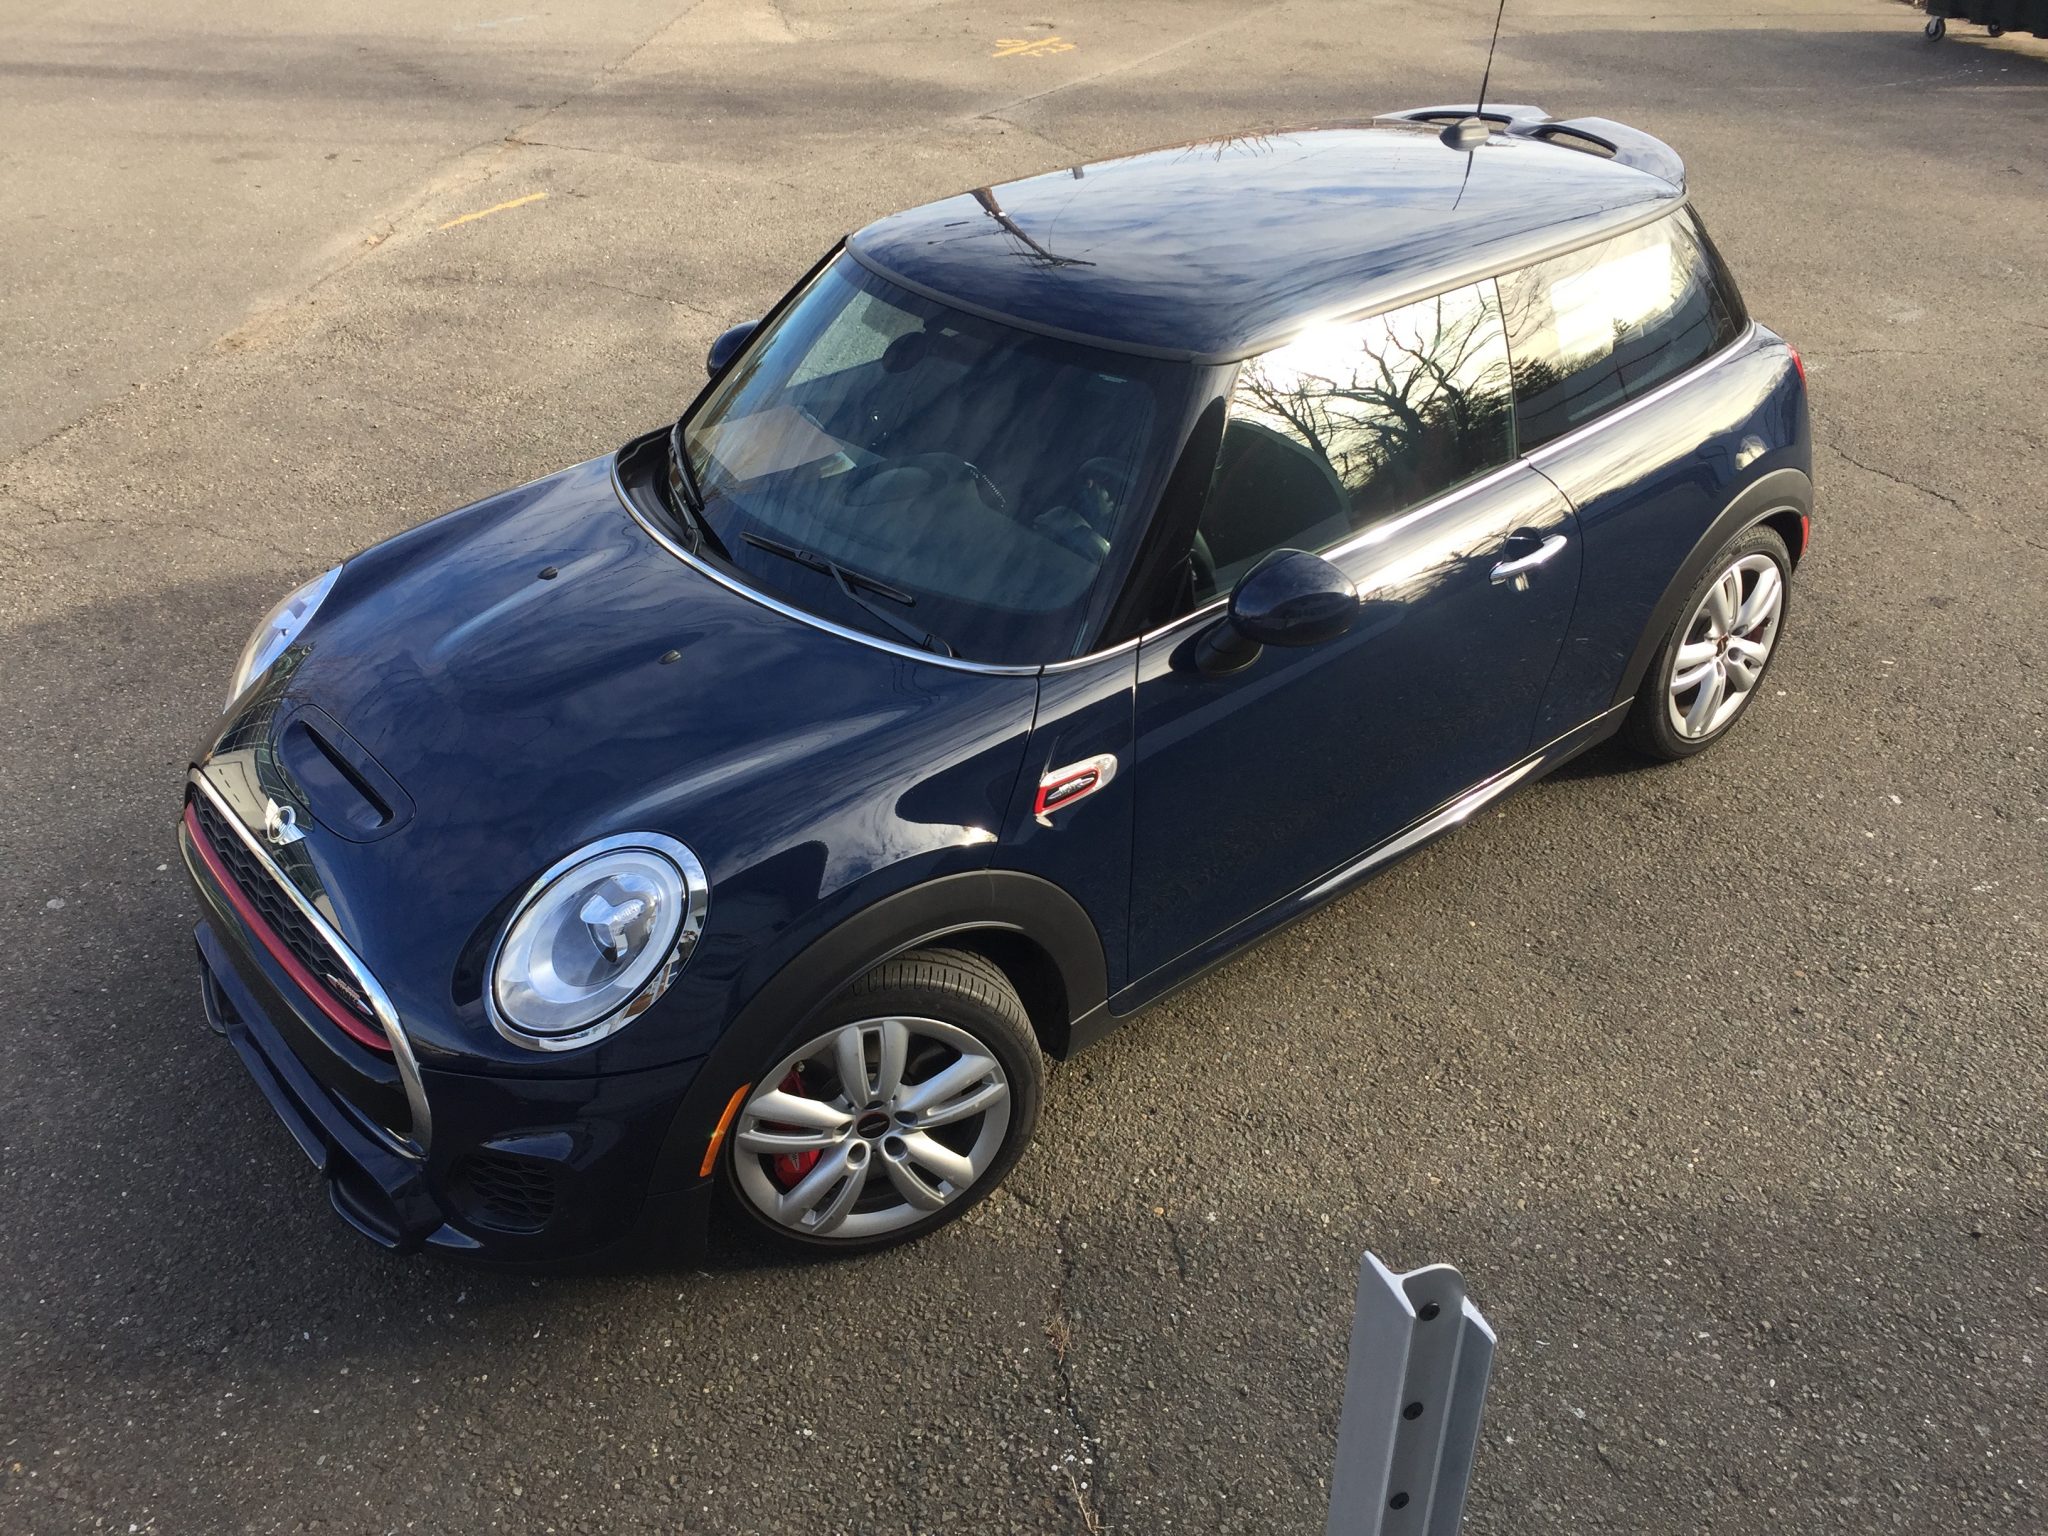 2018 Mini Cooper S JCW for sale, in Mint condition with just 7000 miles